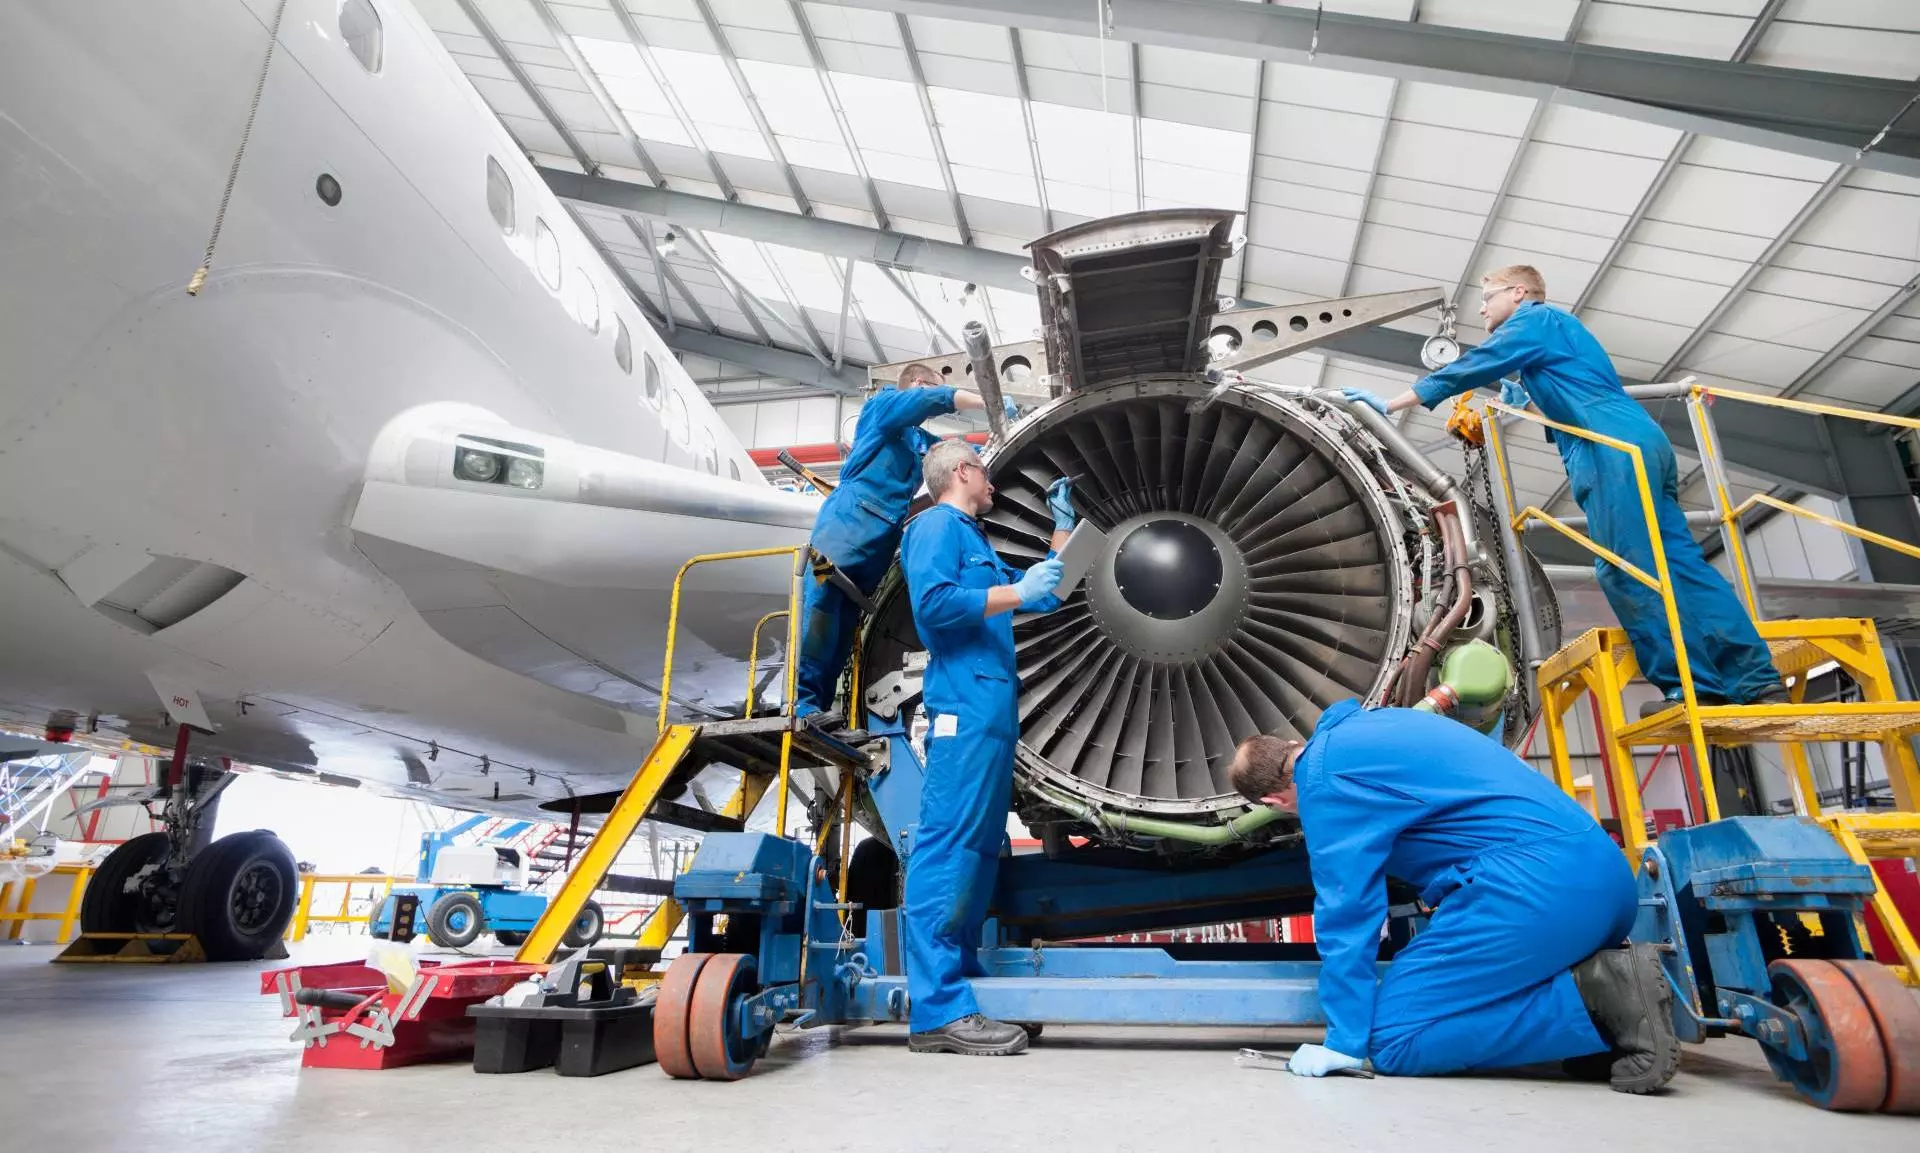 Aerospace logistics not only needs to scale but also develop competence, tech